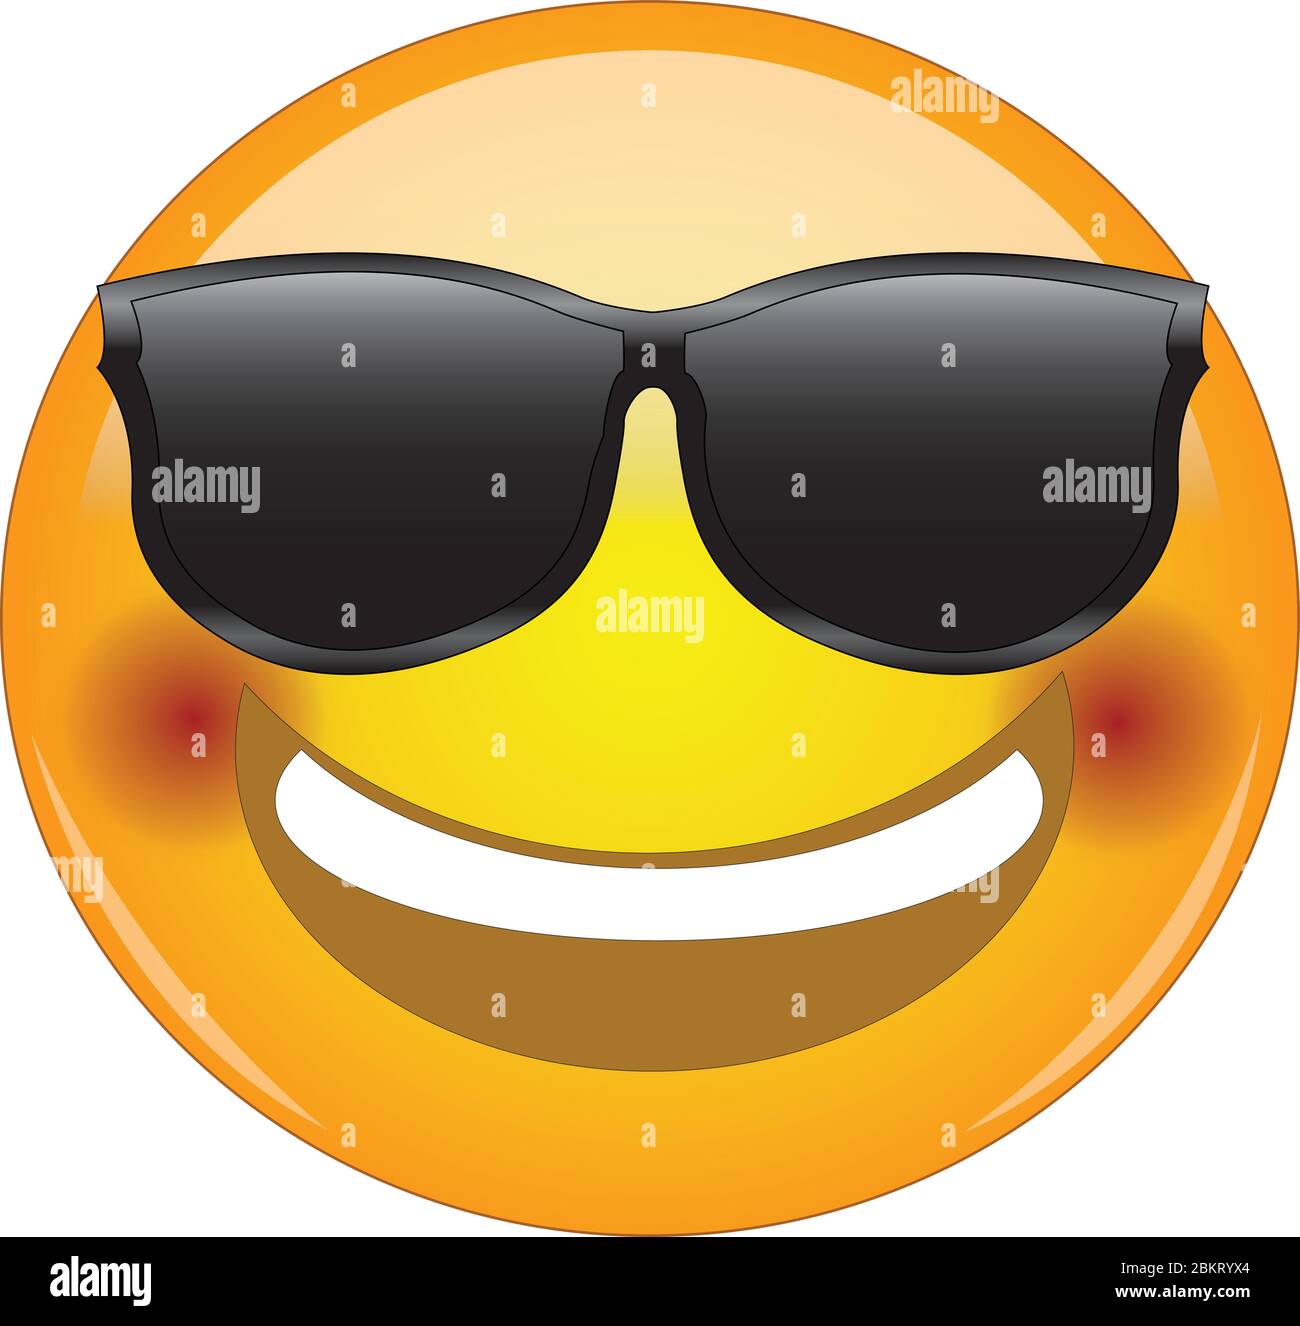 Awesome flushed face smiling emoji. Cool happy face emoticon wearing sunglasses and with a wide smile showing upper teeth and blushing cheeks. Express Stock Vector